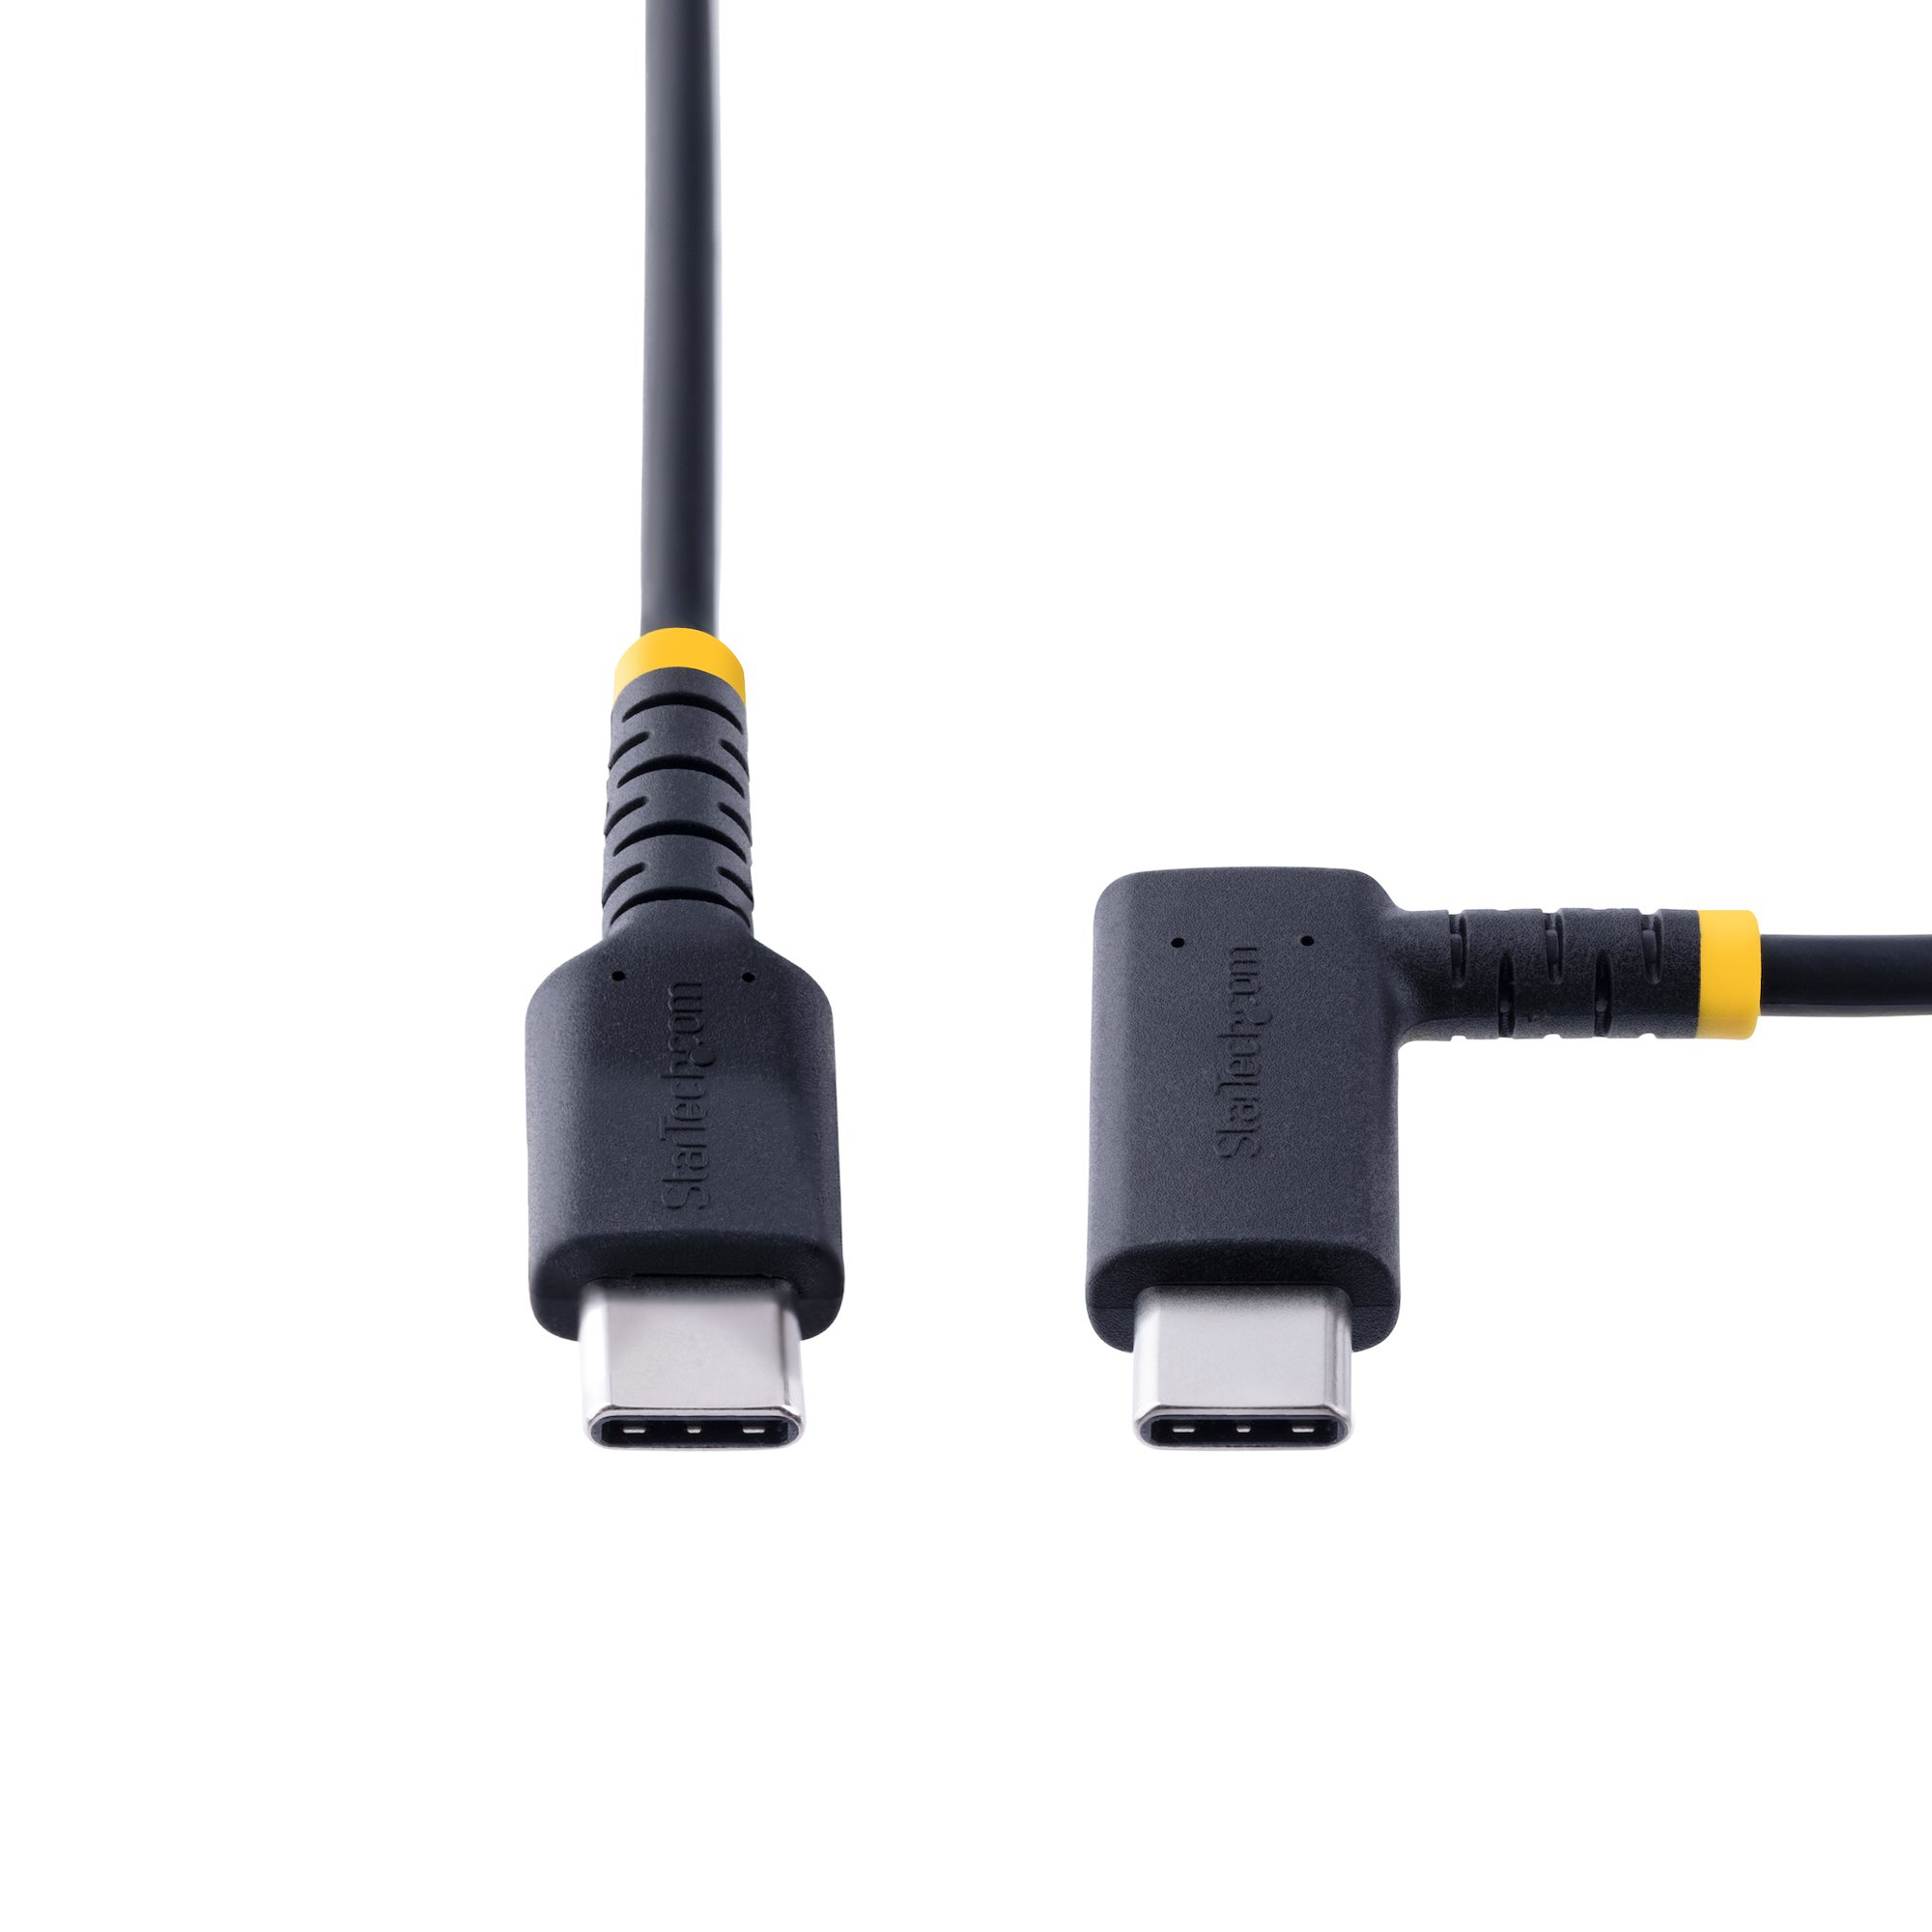 Product  StarTech.com 2m USB C Charging Cable, Durable Fast